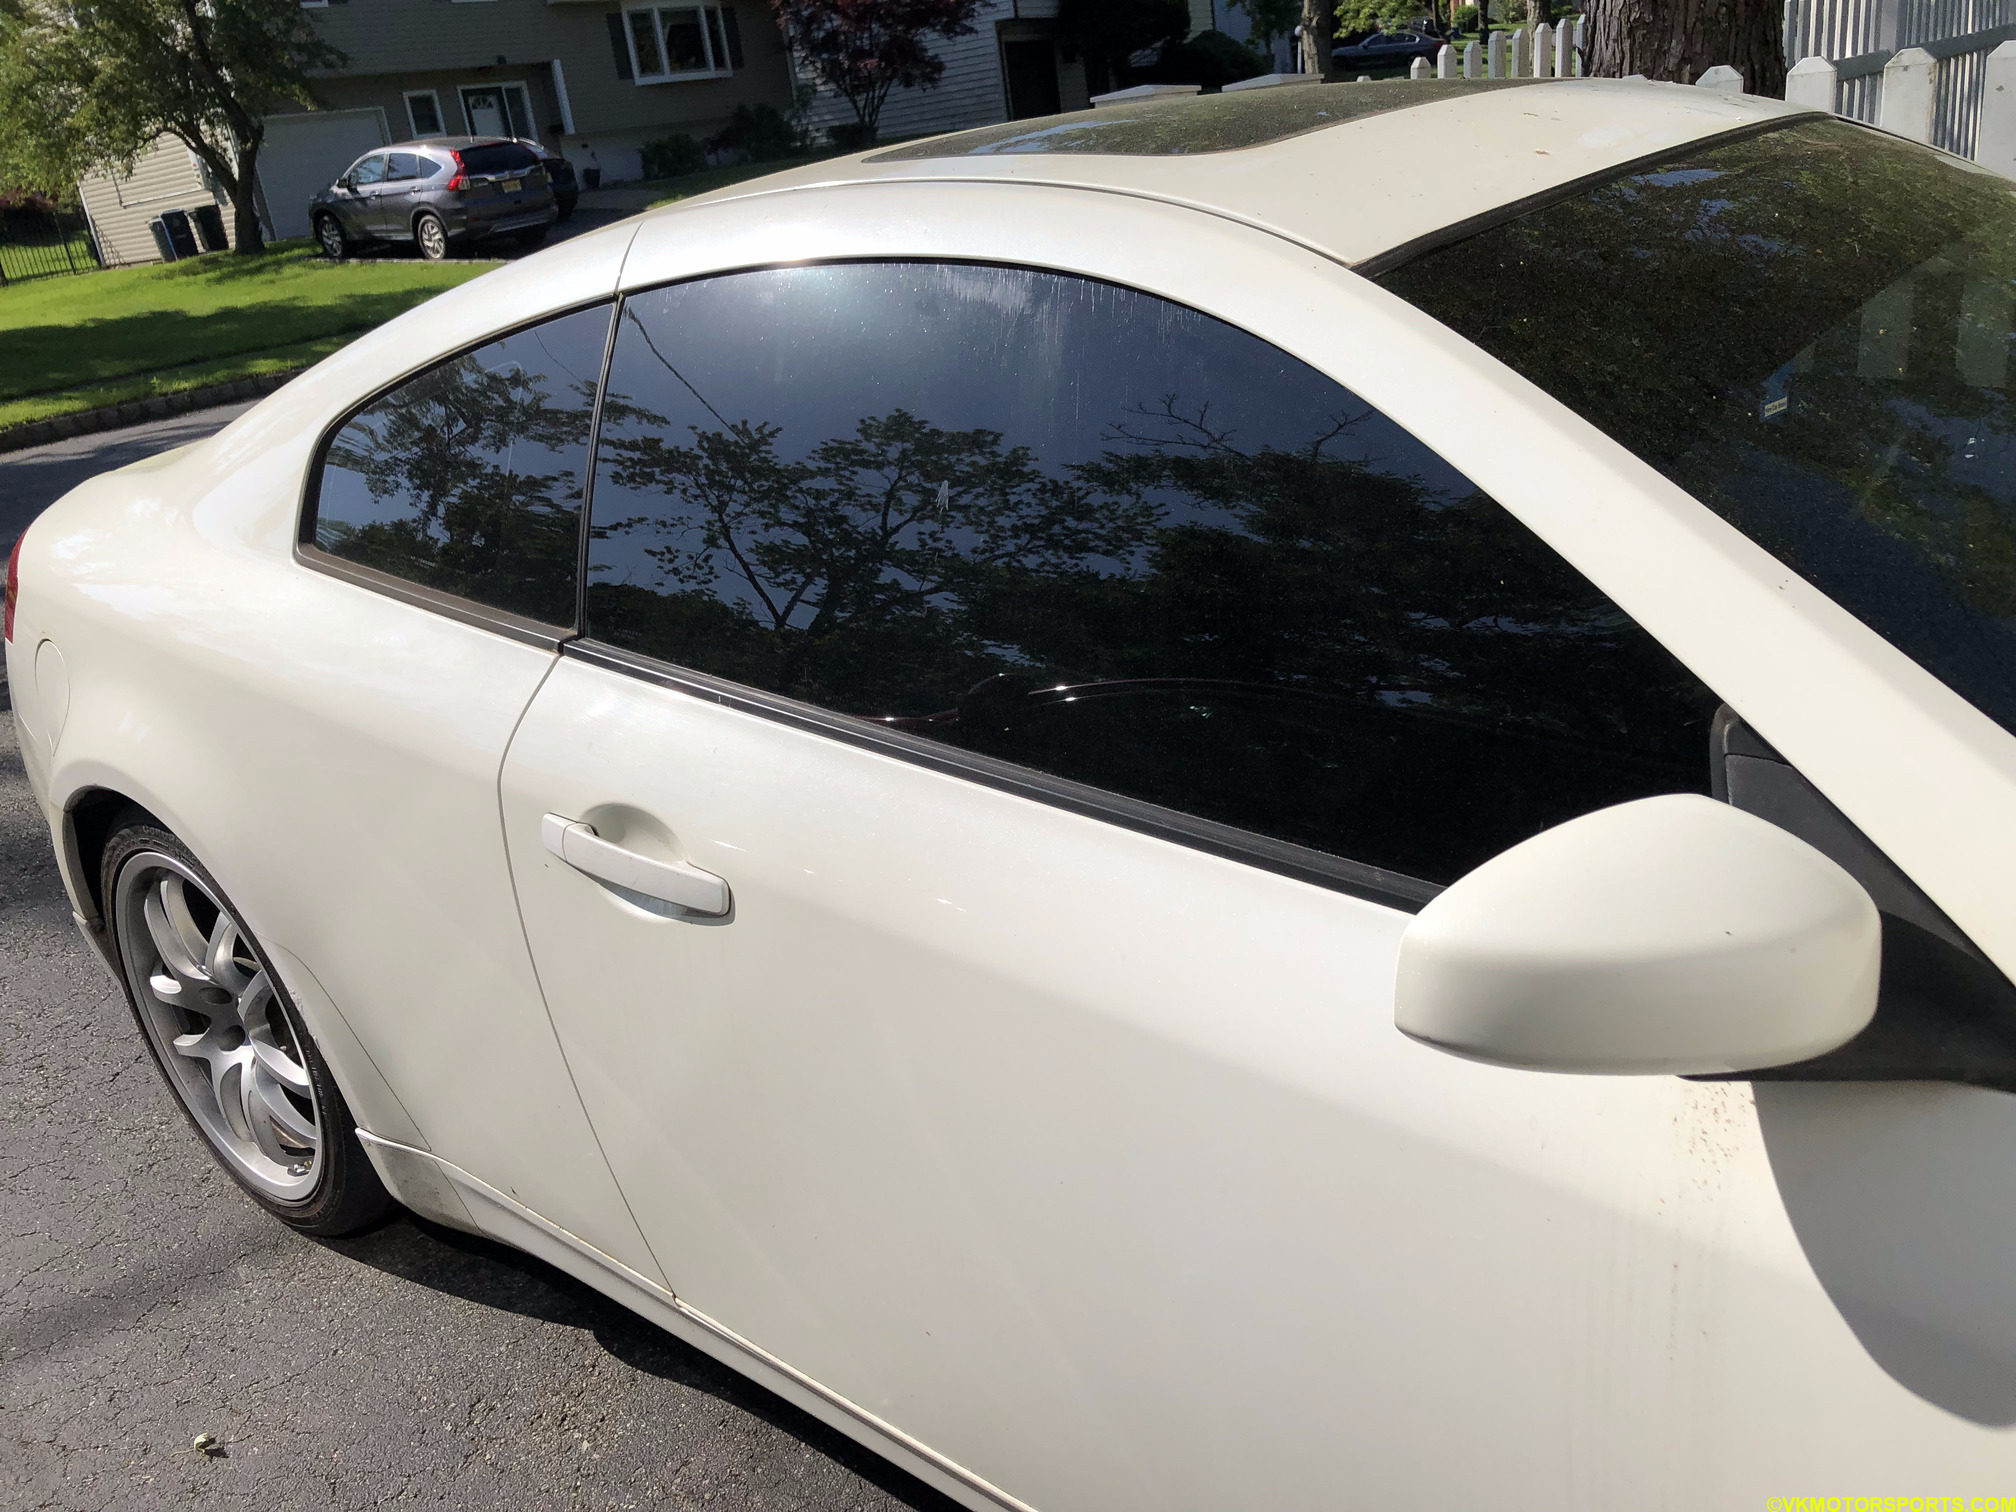 Figure 8a. 20% tint on windows and 5% on the rear glass